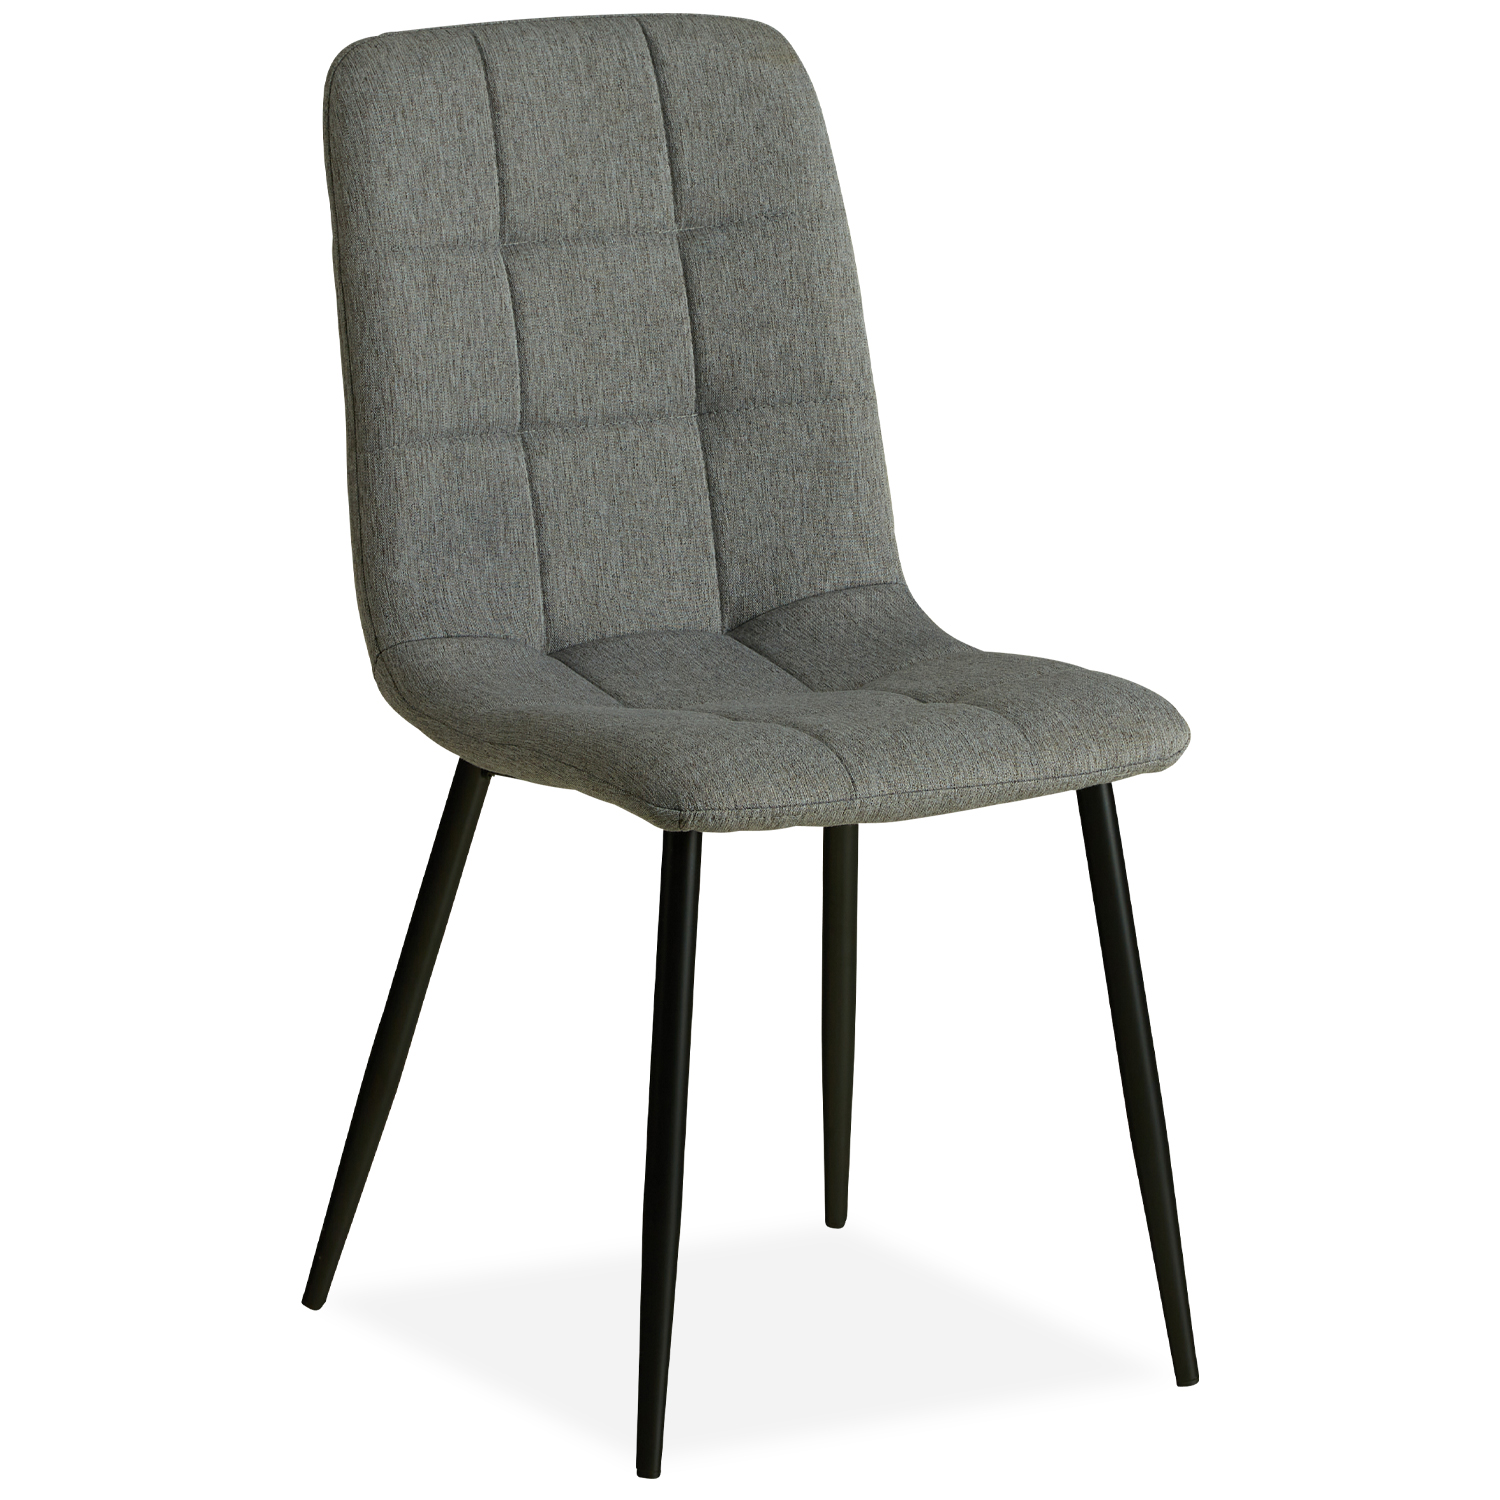 Dining Chair Egg Chair Grey Armchair Dining Room Chair Upholstered Chair Eames Chair Kitchen Chair